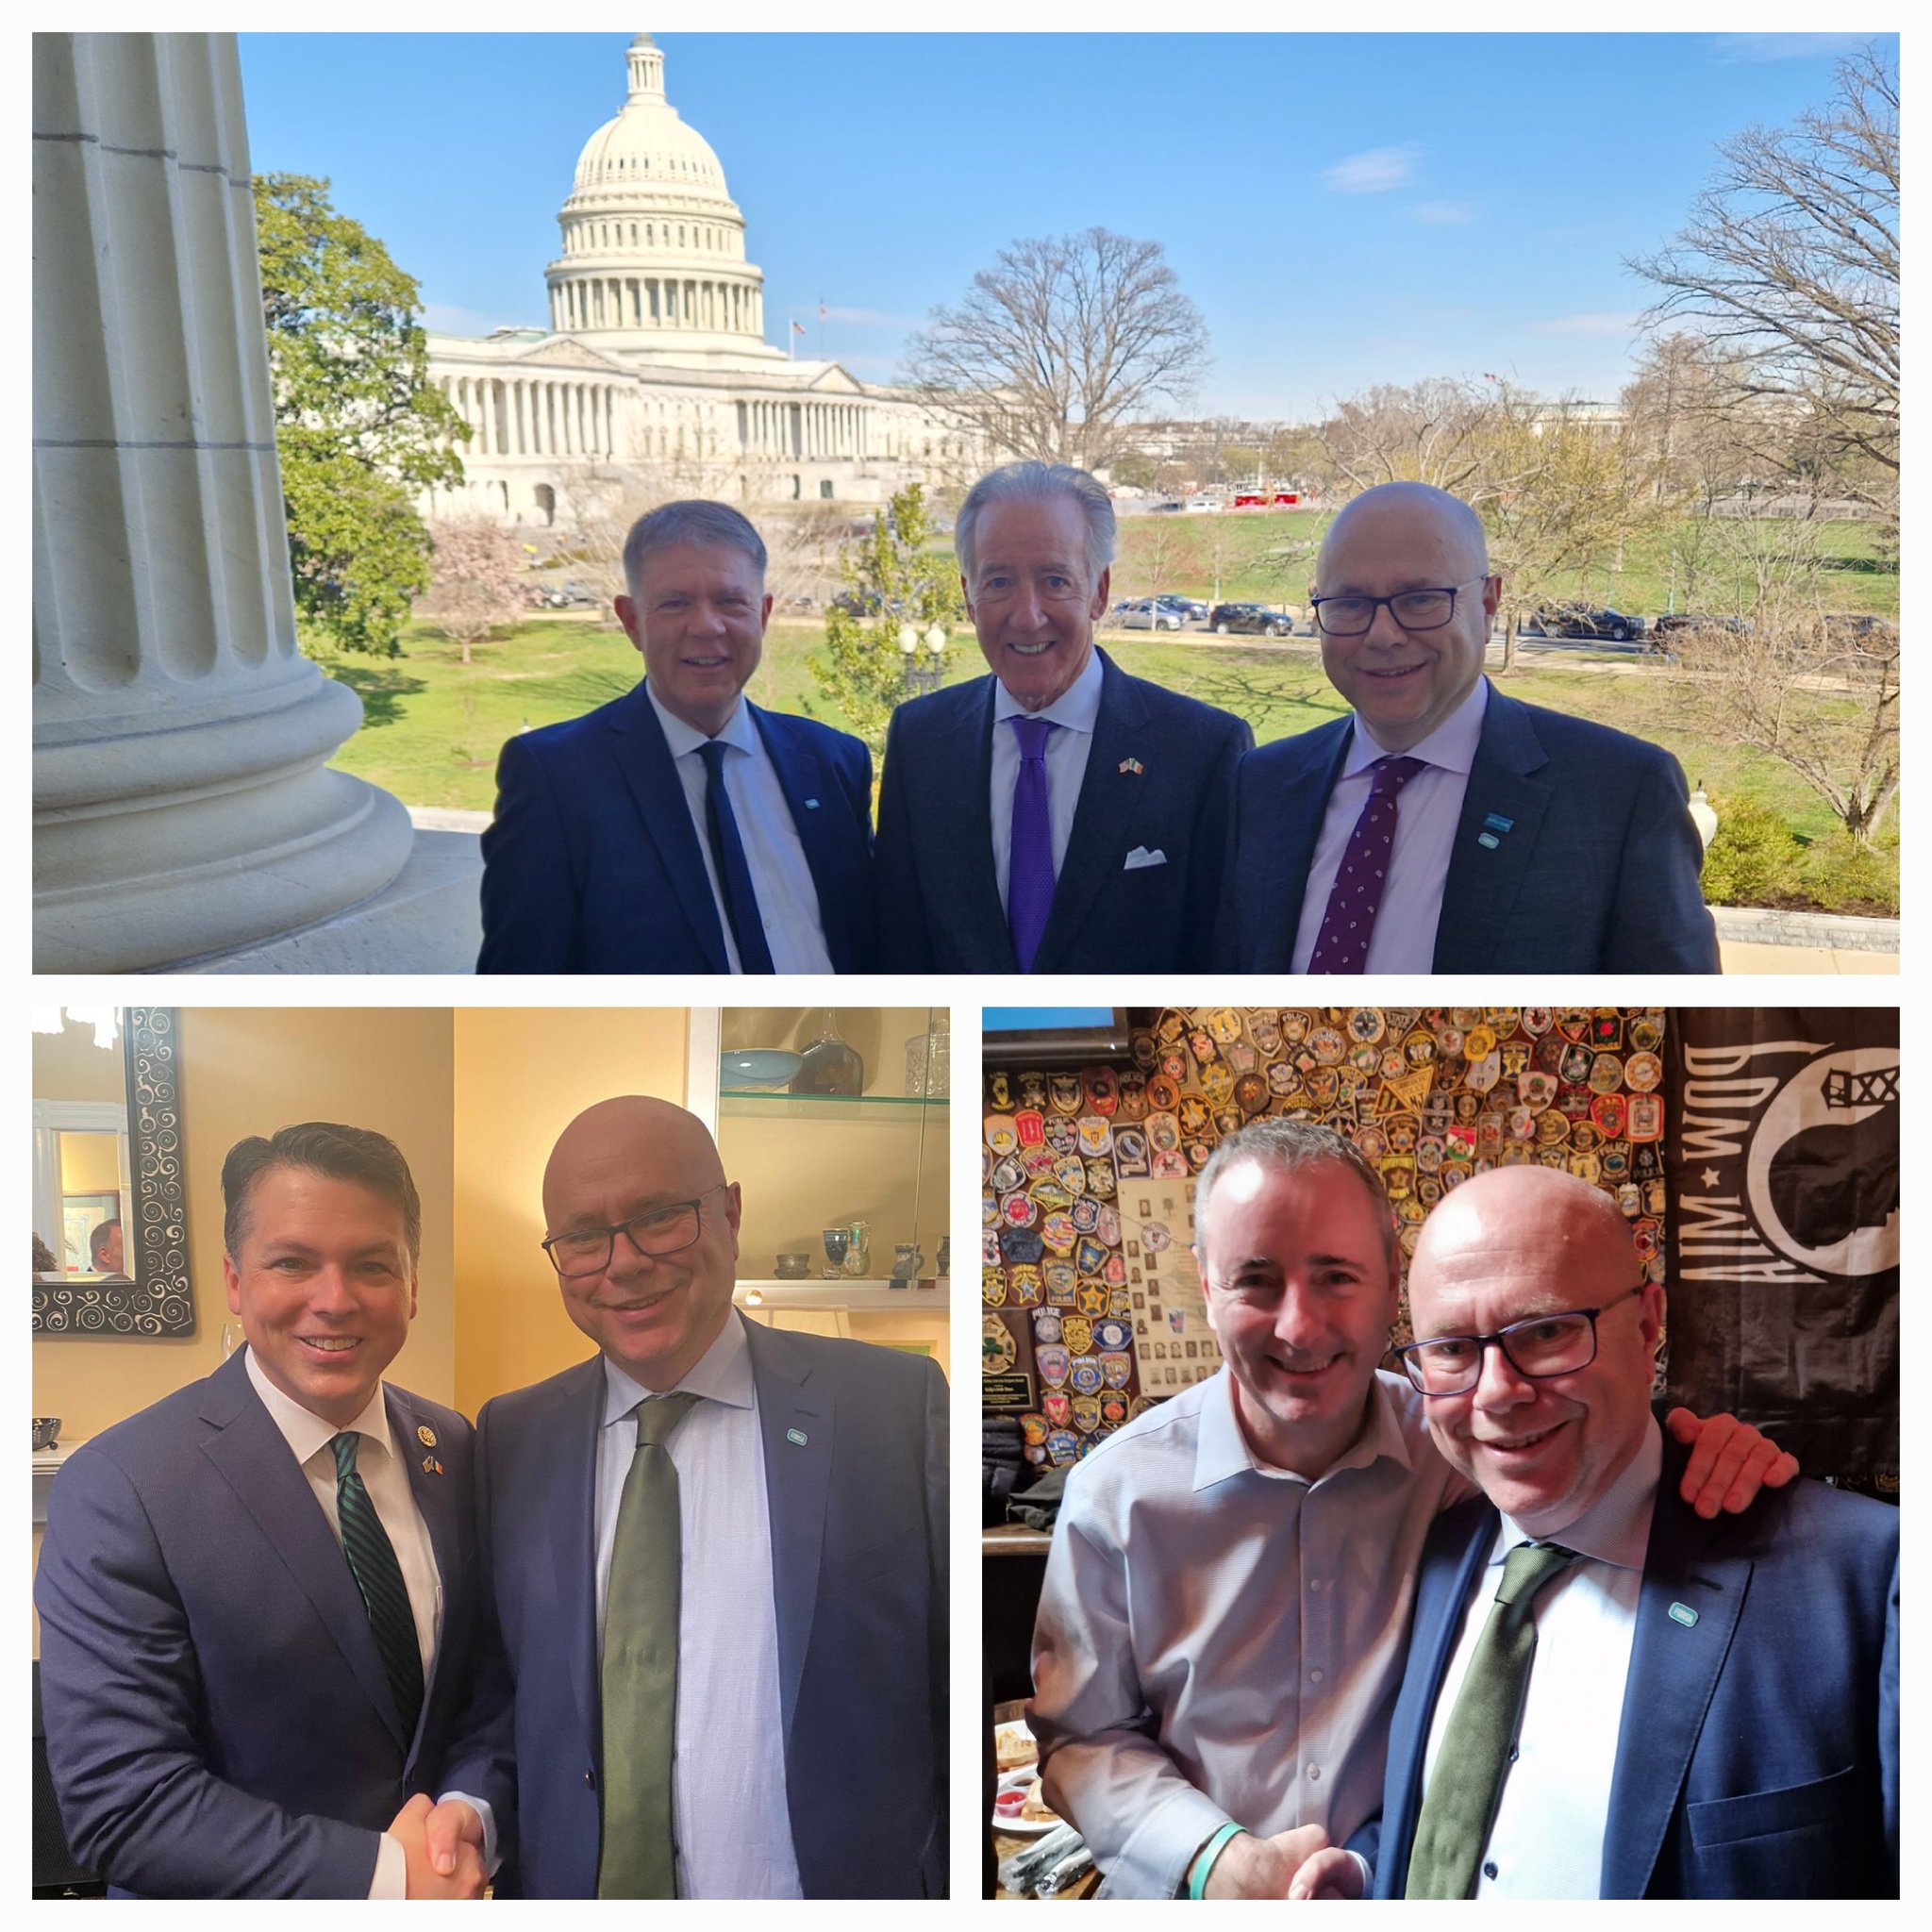 The Fórsa delegation took the opportunity to meet with a number of senior Irish political leaders, in addition to a number of US politicians and representatives.